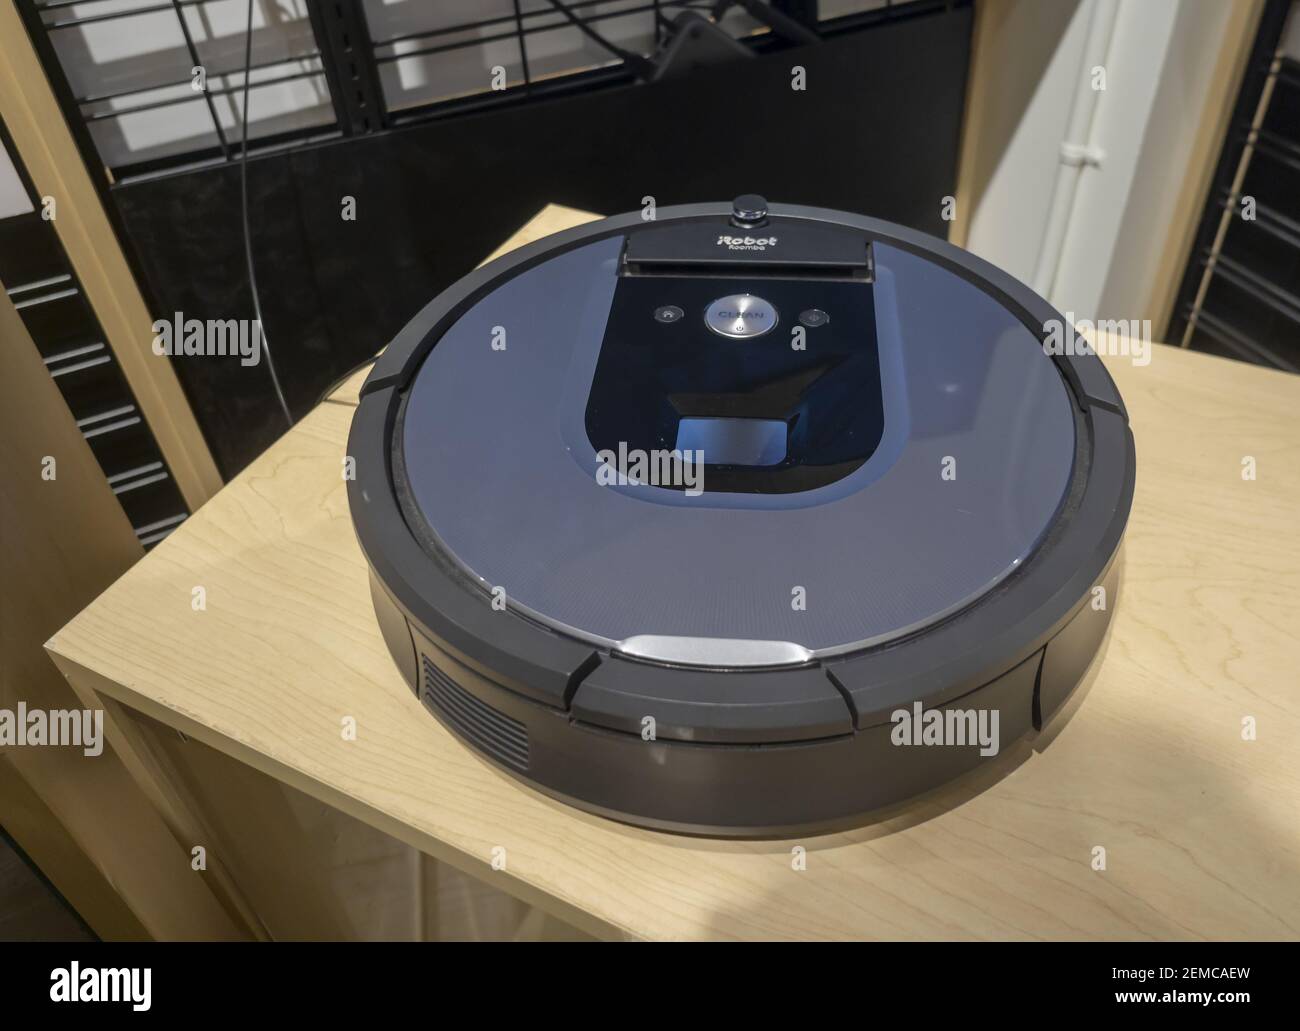 A display of iRobot's Roomba vacuum cleaner in a store in New York on on  Tuesday, February 5, 2019. iRobot is scheduled to release fourth-quarter  earnings after the bell tomorrow. (ÂPhoto by